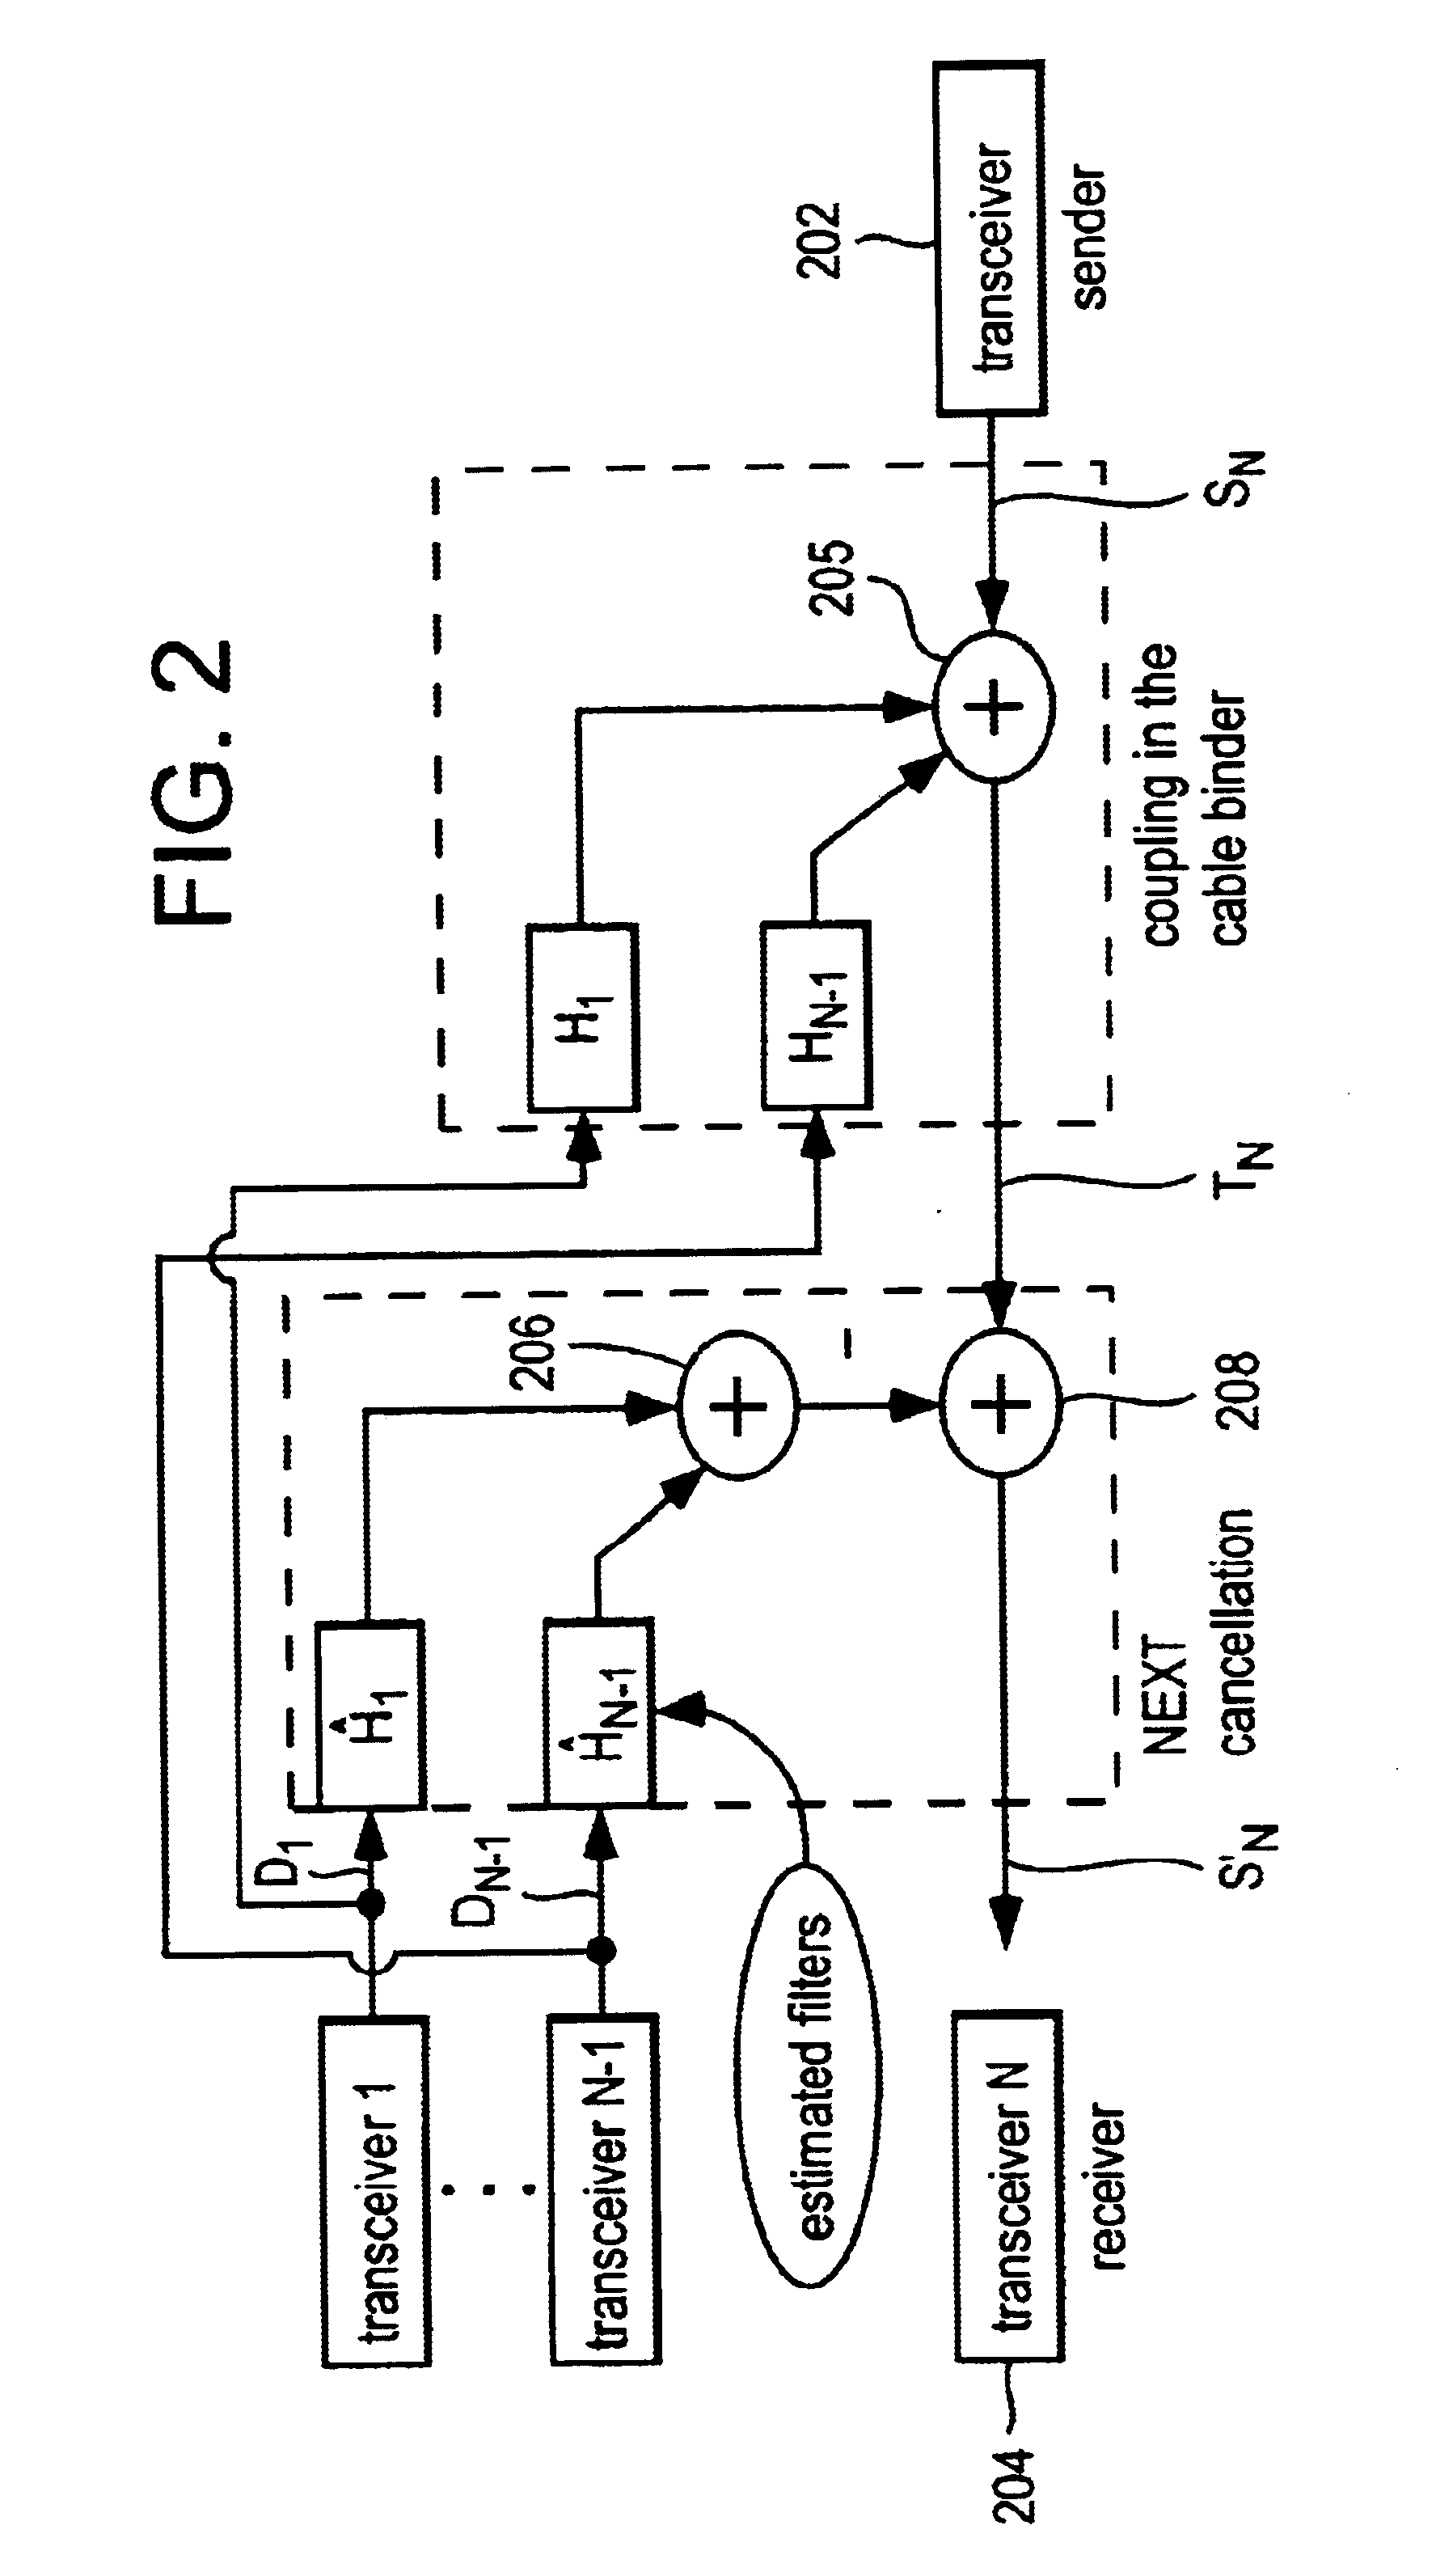 Method and device for reducing crosstalk interference